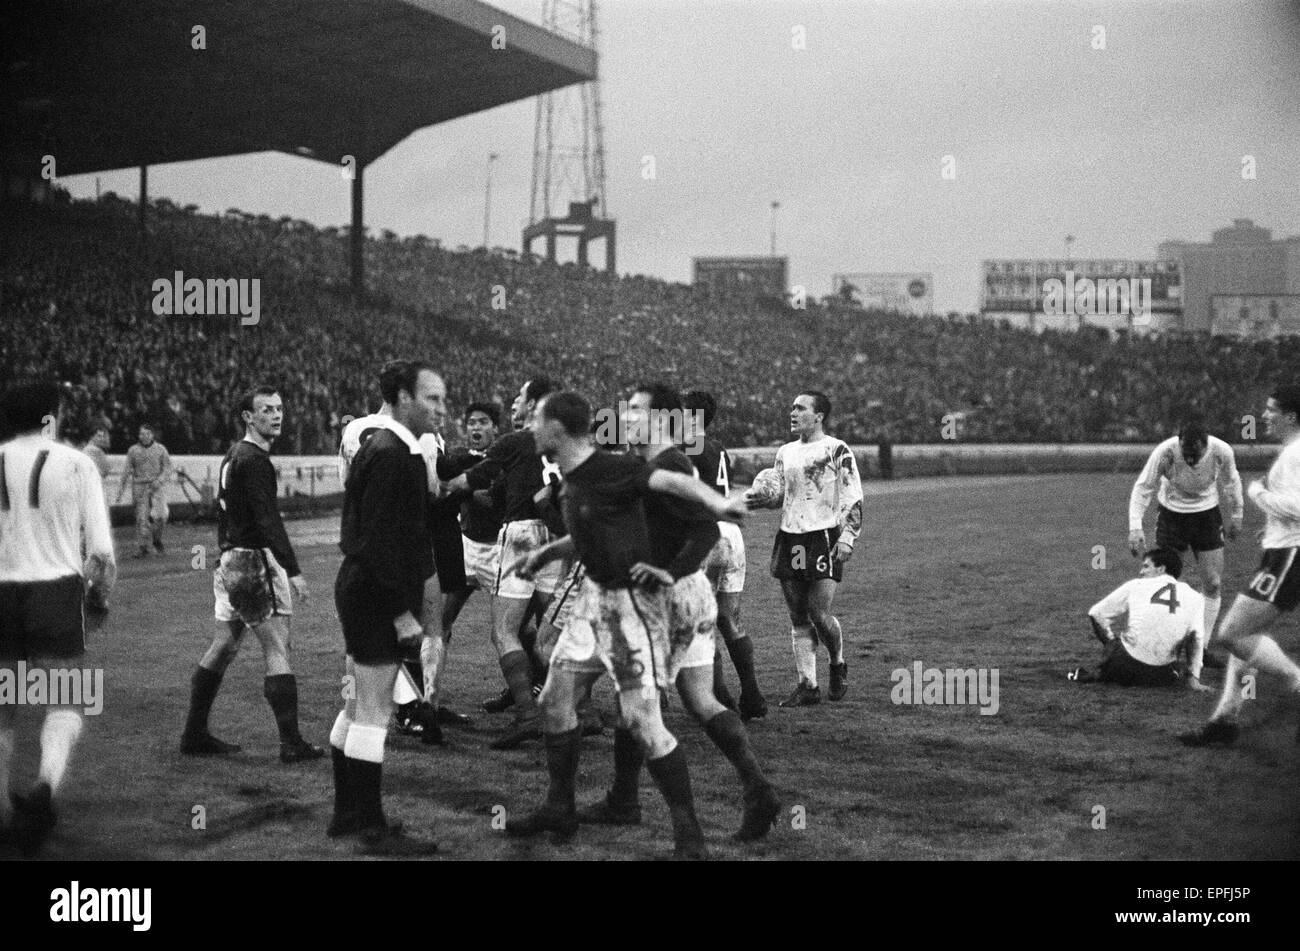 Inter Cities Fairs Cup Semi Final Second Leg match at Stamford ...